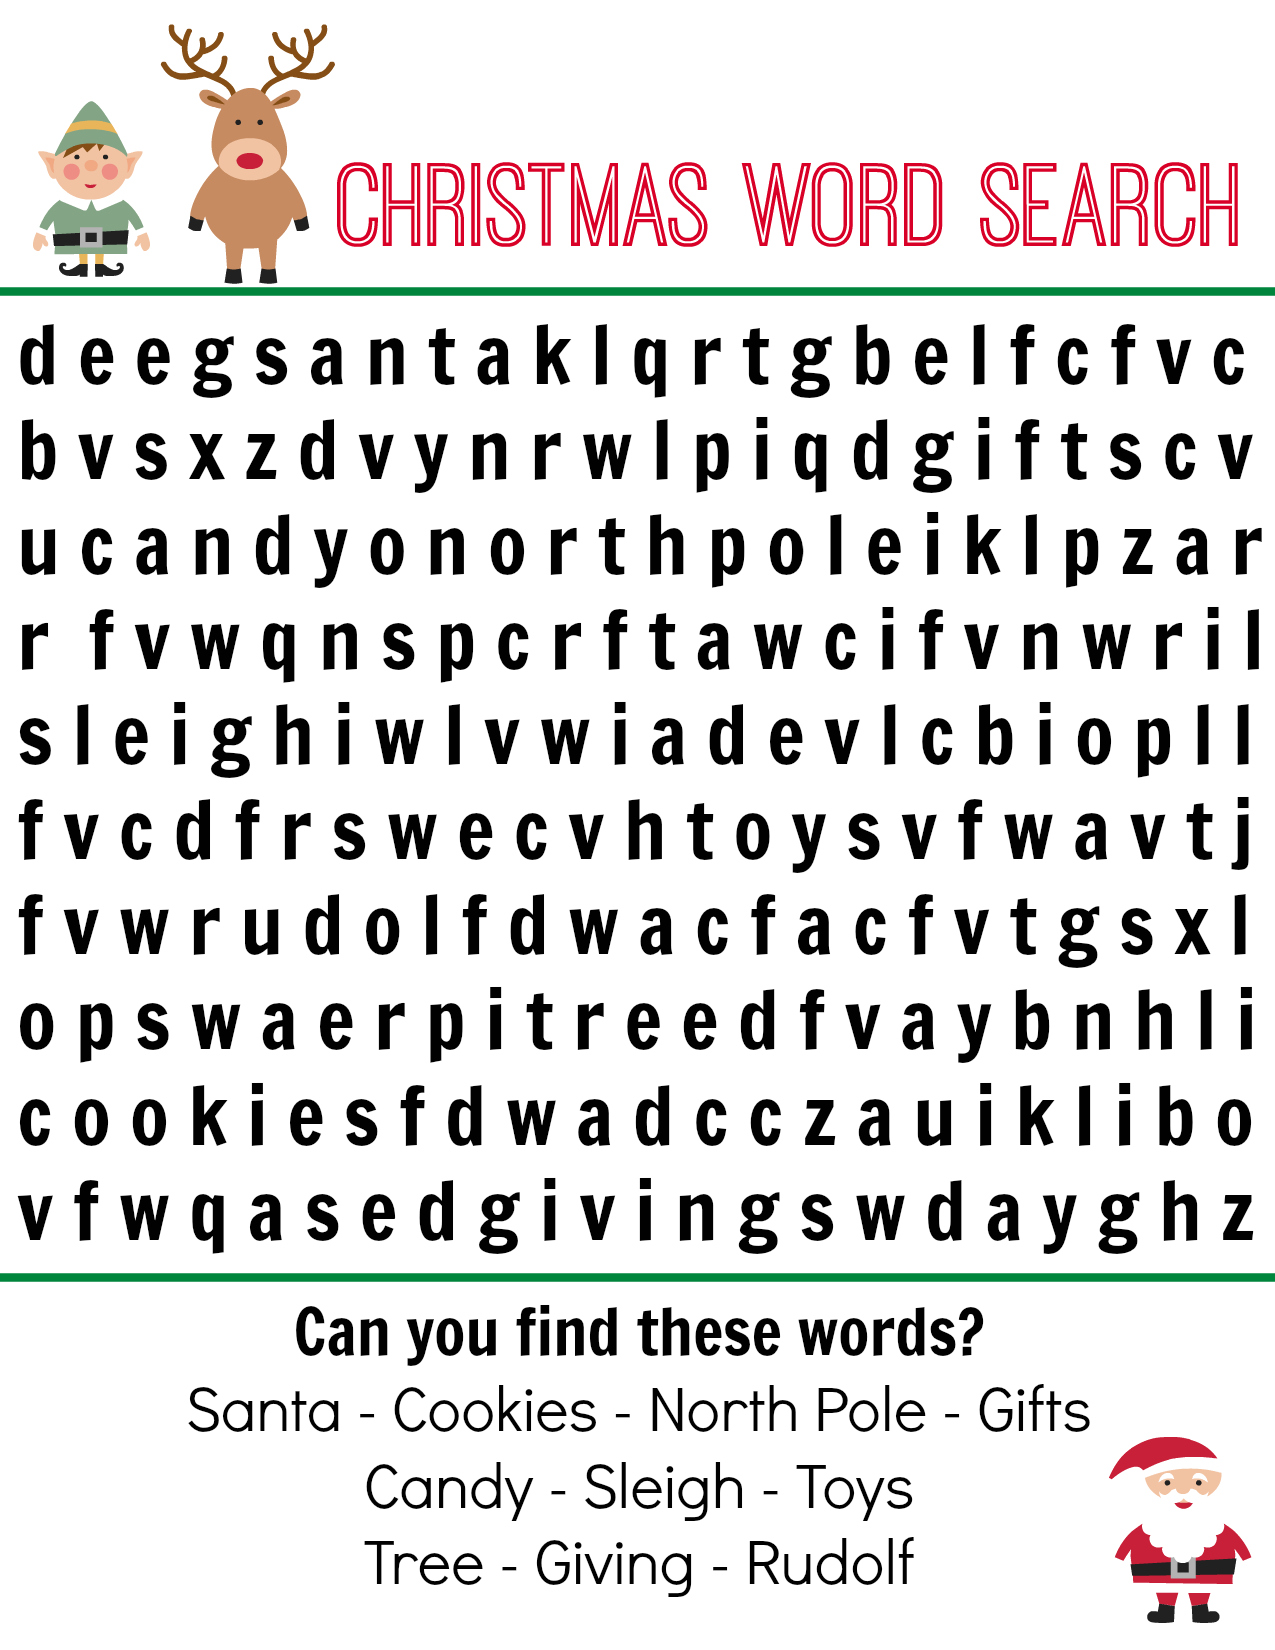 printable-christmas-word-search-for-kids-adults-happiness-is-homemade